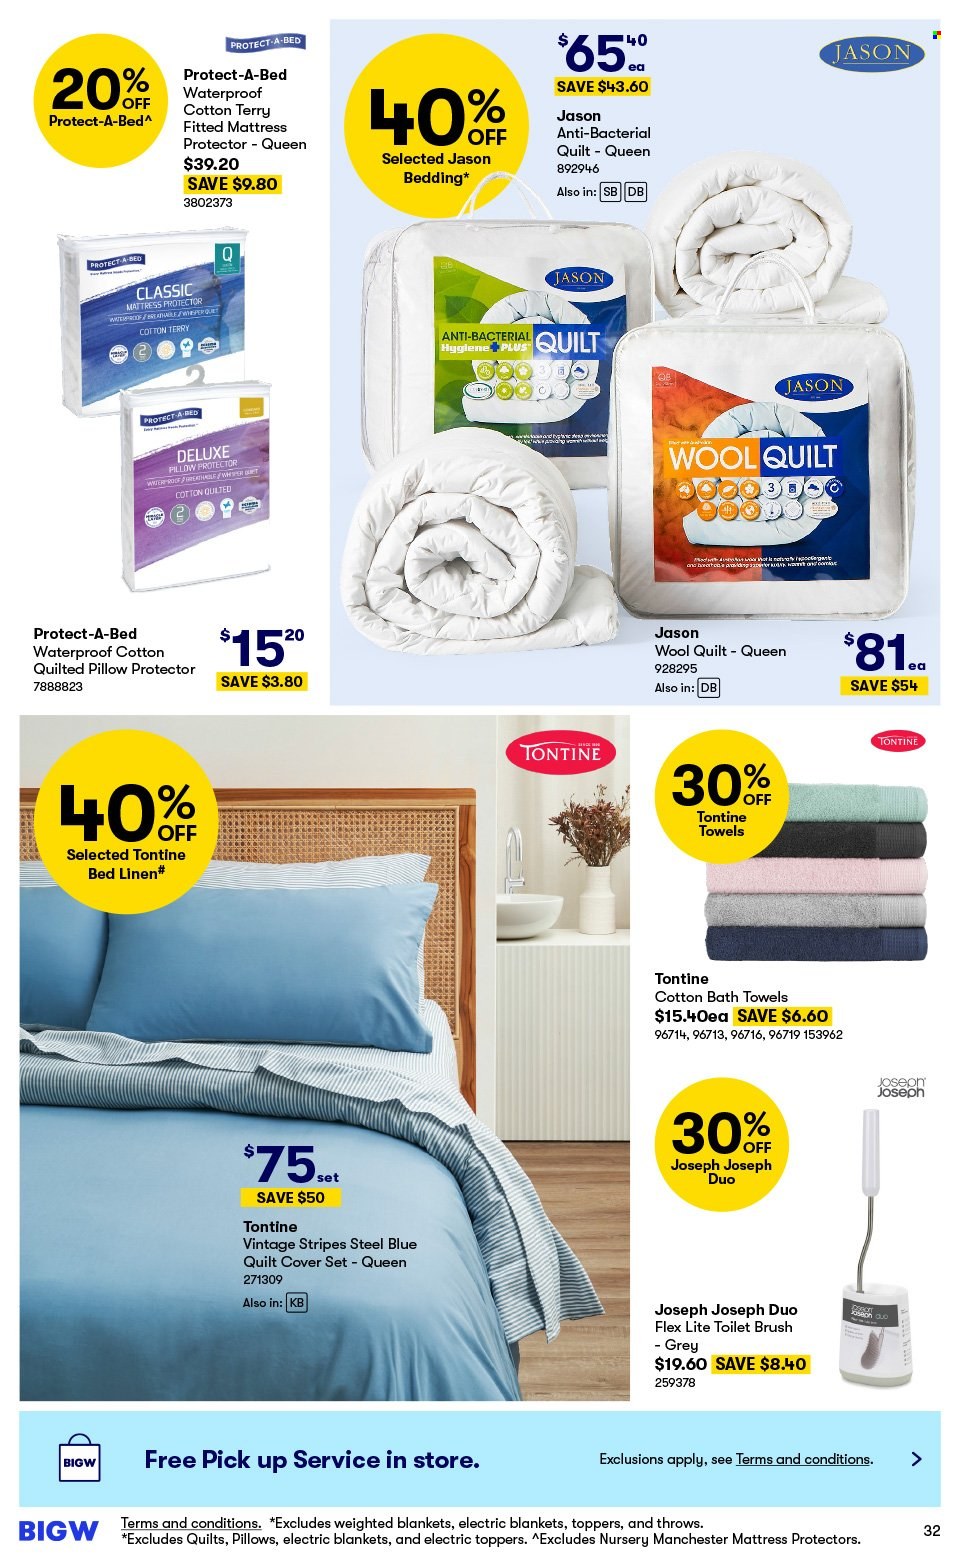 thumbnail - BIG W Catalogue - Sales products - Whisper, toilet brush, bedding, blanket, linens, wool quilt, mattress protector, Protect-A-Bed, quilt cover set, pillow protector, bath towel, towel, electric blanket. Page 32.